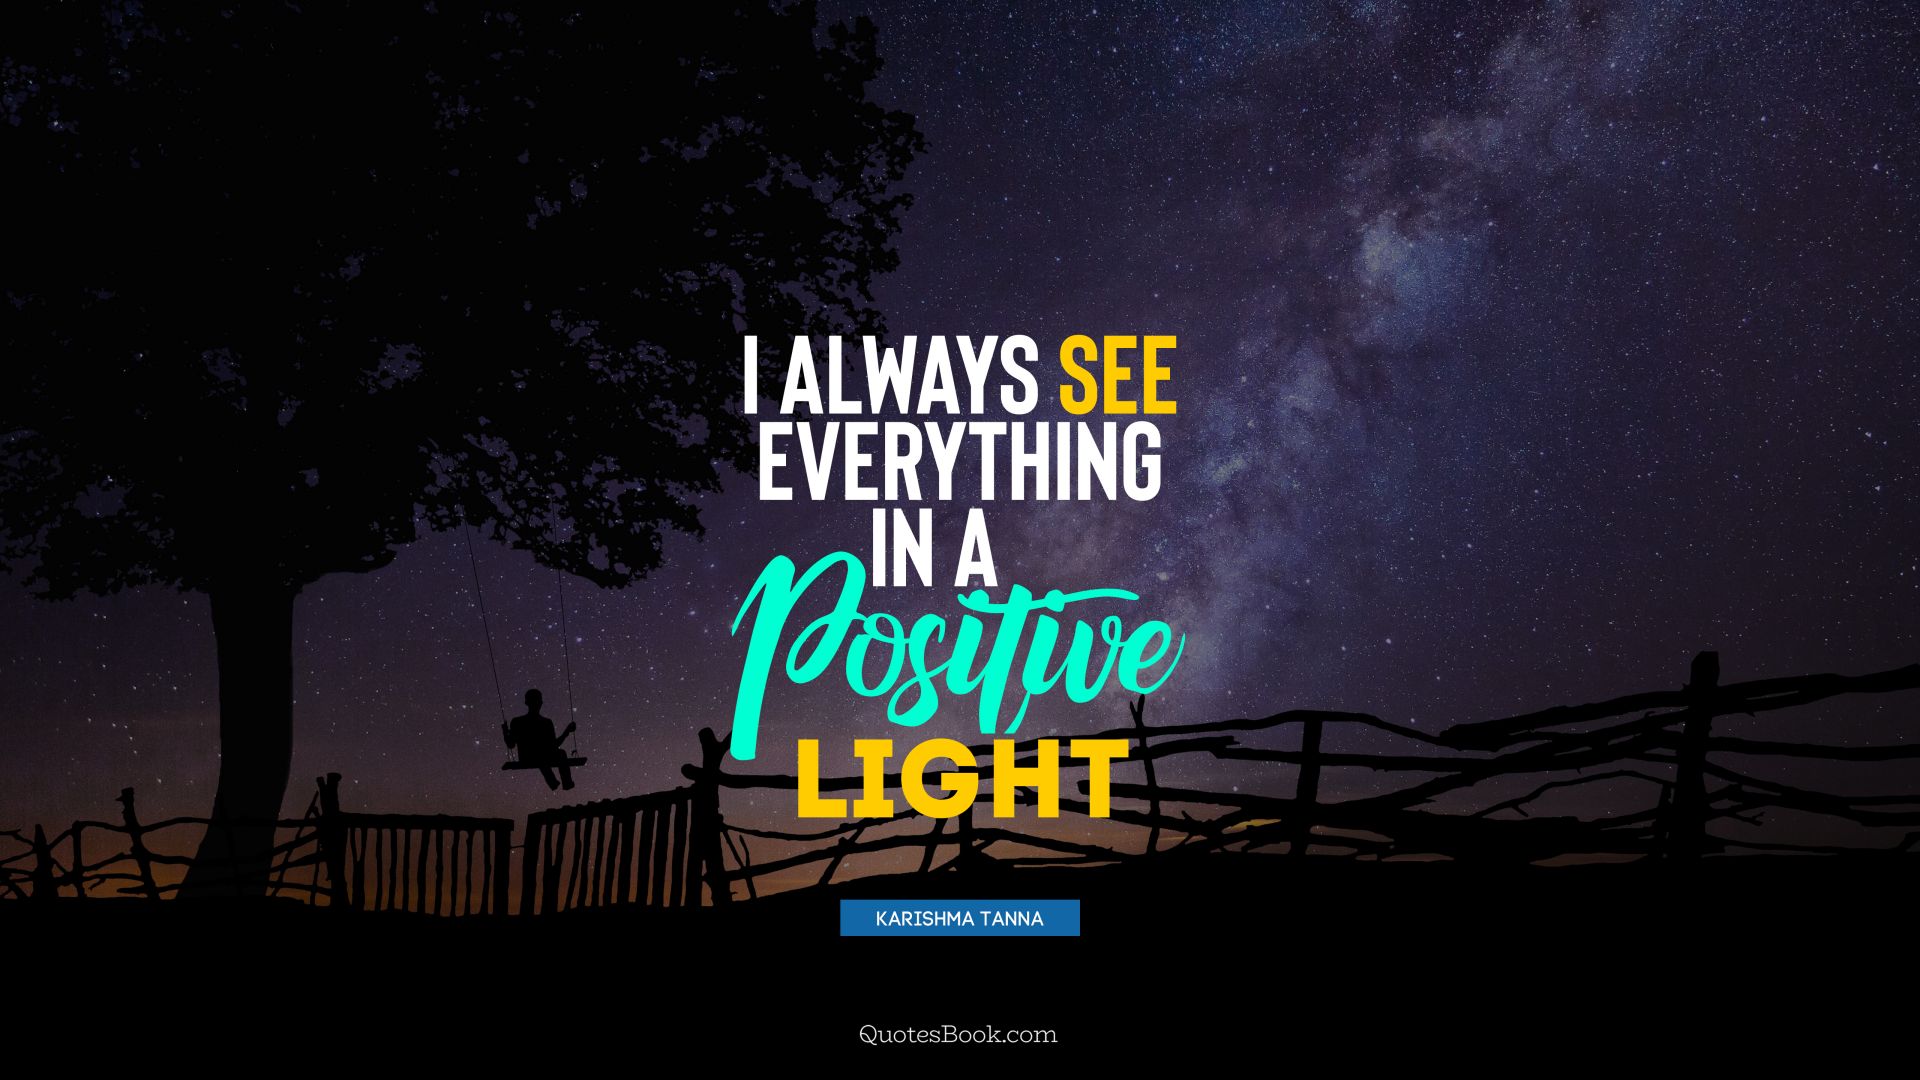 I always see everything in a positive light. - Quote by Karishma Tanna